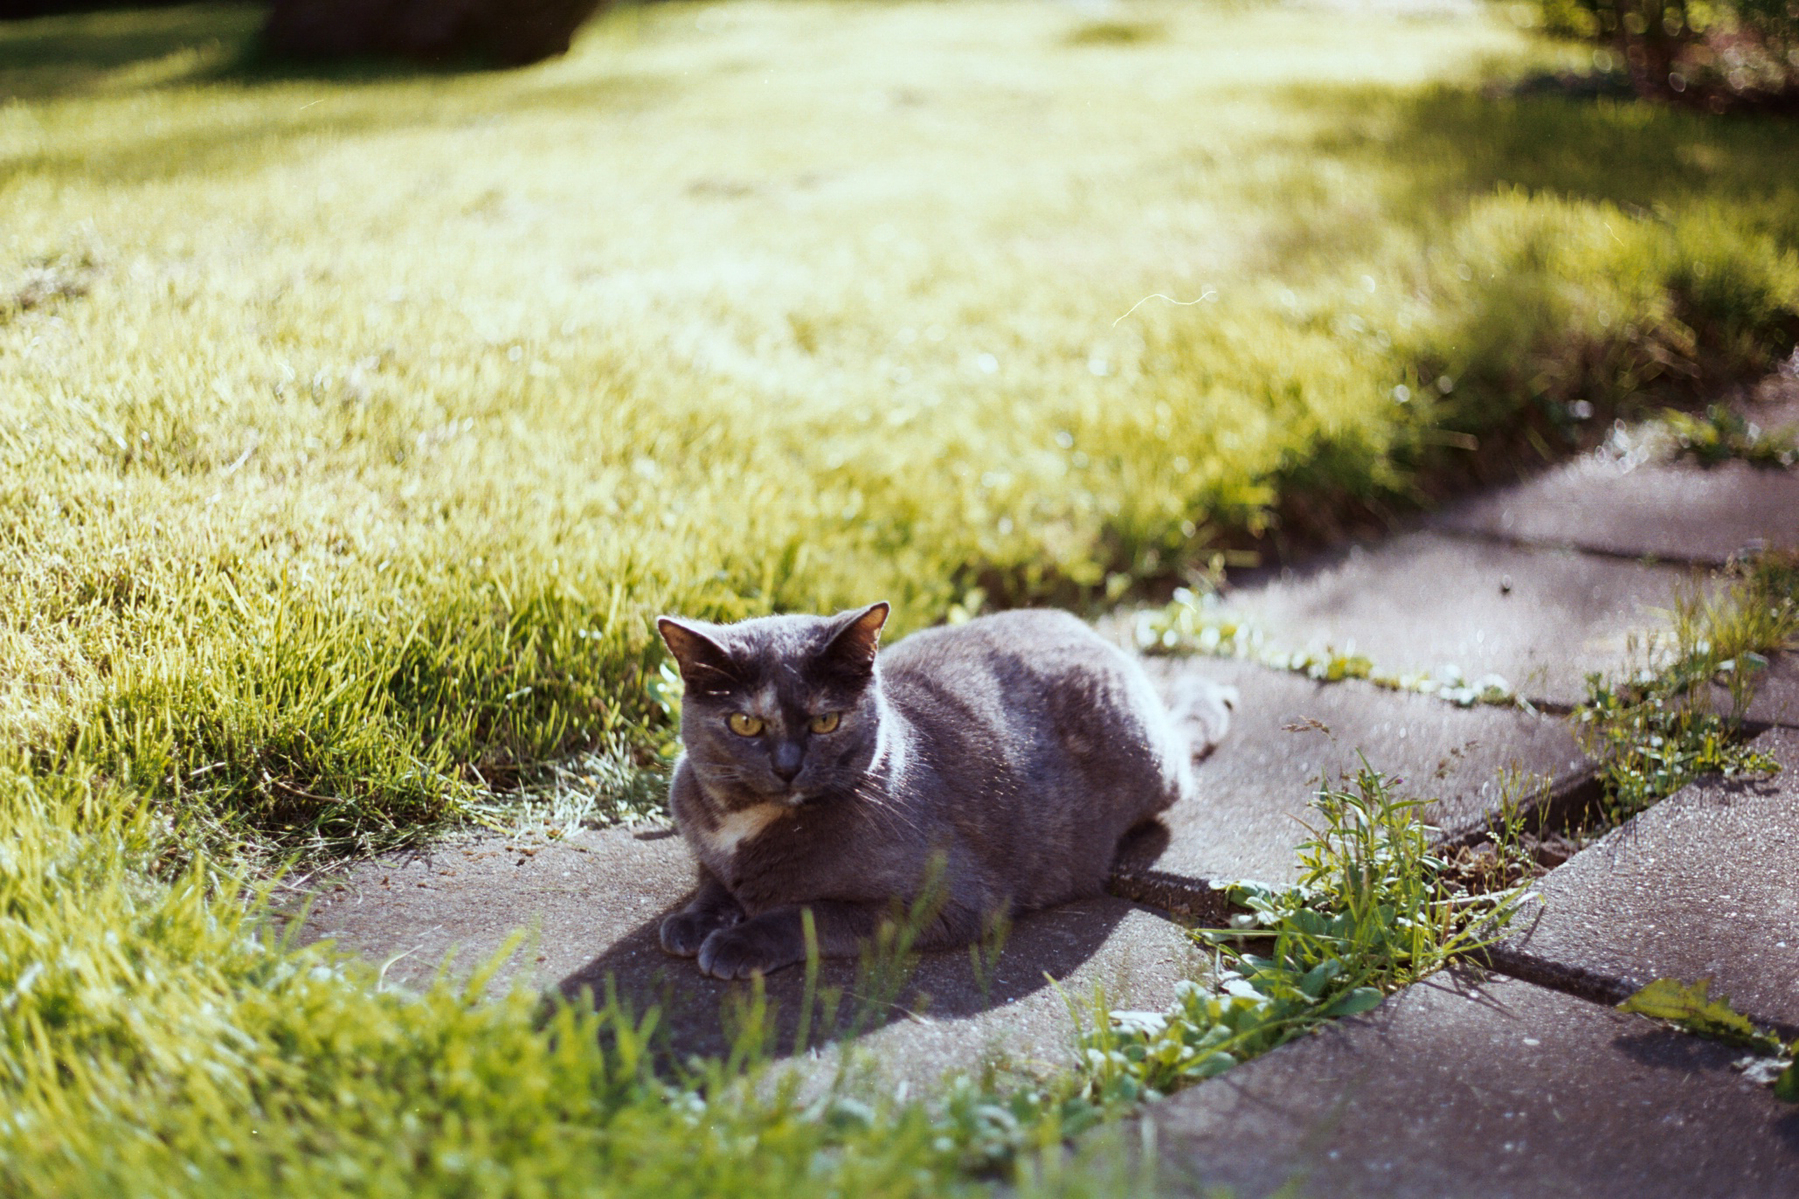 That same cat, grey-ish brown, loafs on a garden pavement.